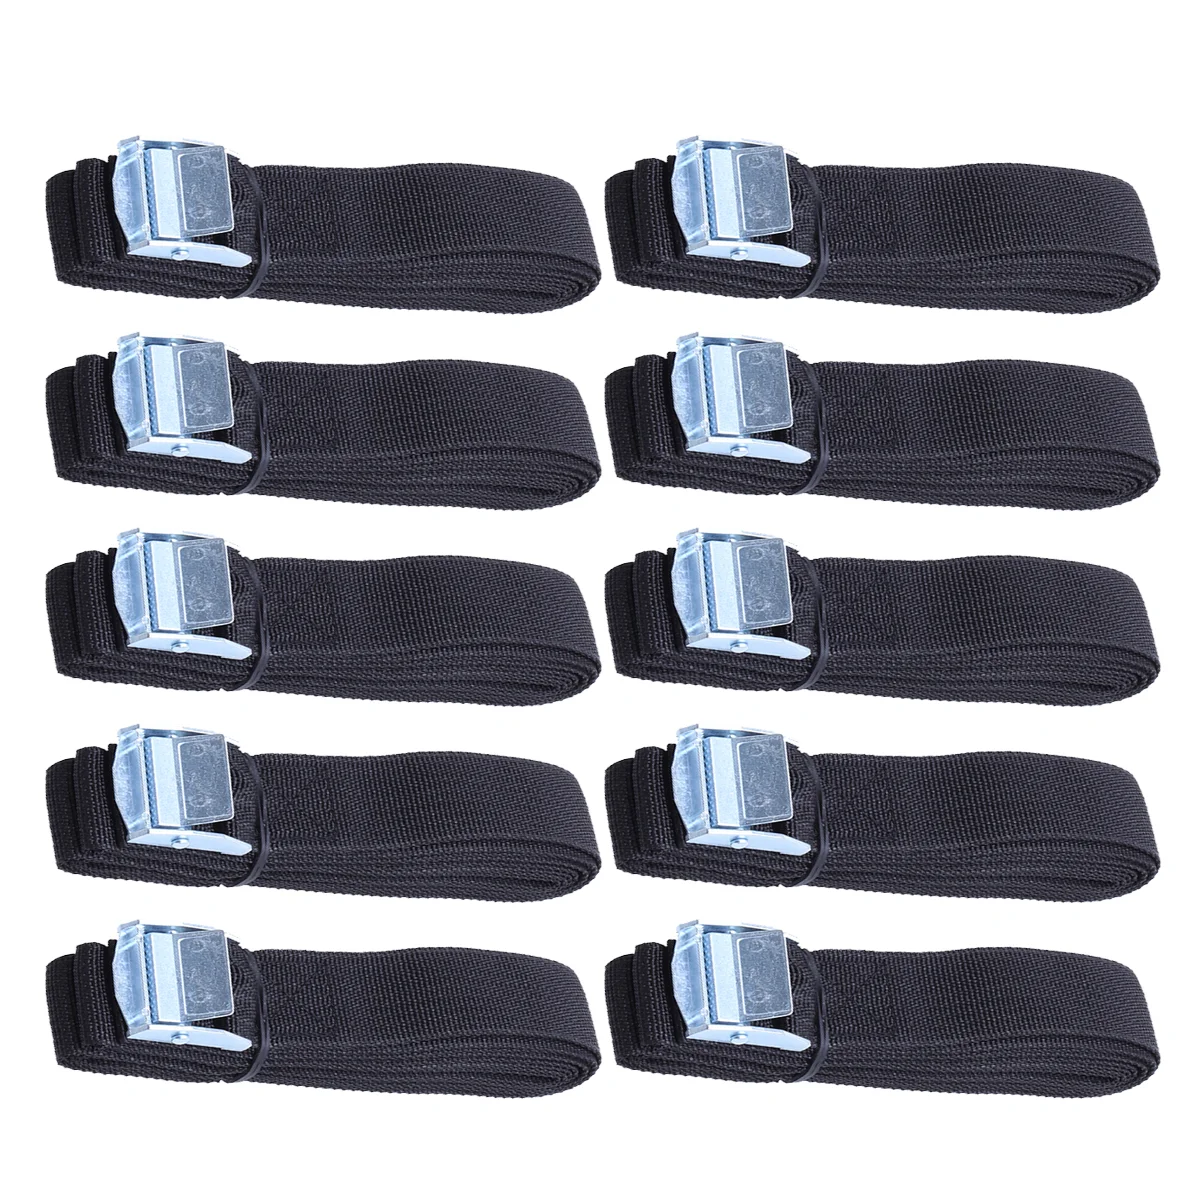 

Adjustable Cam Buckle Lashing Straps for Cargo Carry on Car Motorcycle Kayak and More - Secure and Strong Belt Cinch Down System